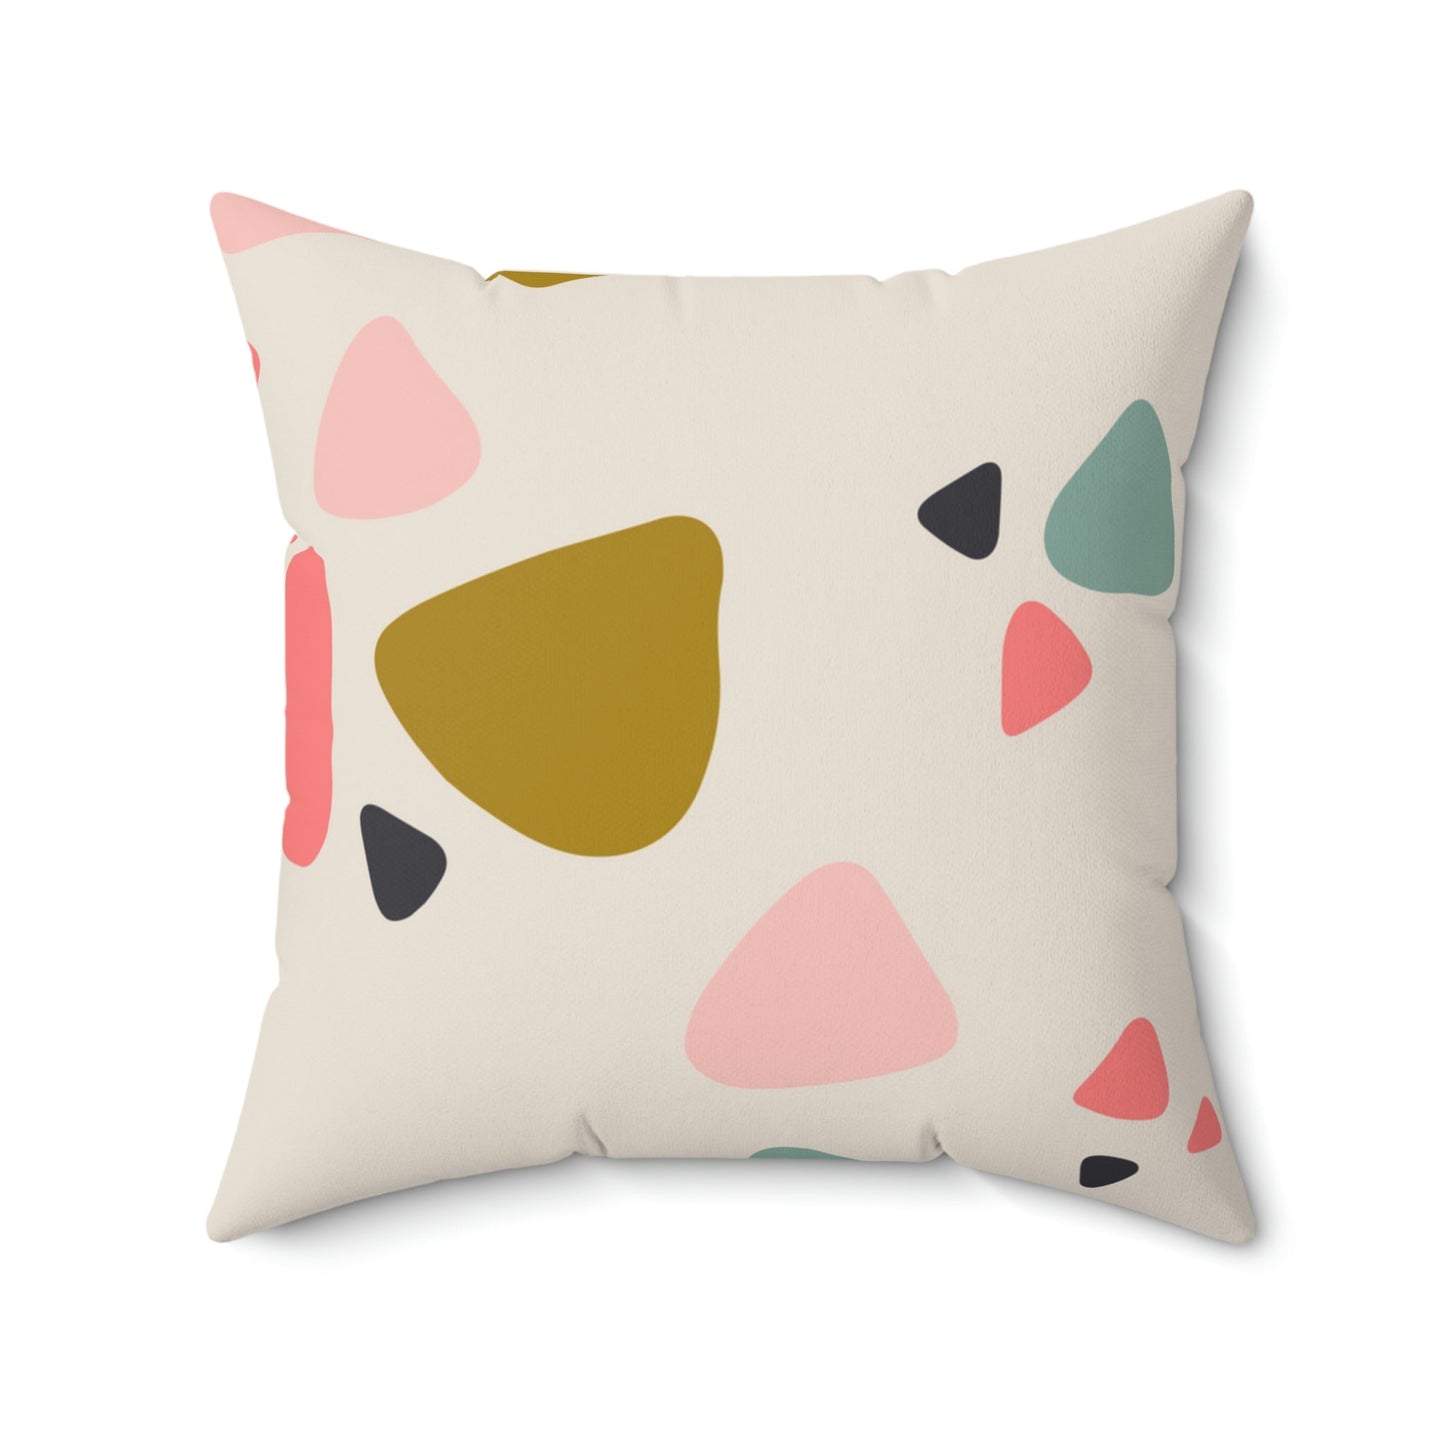 Broken Pieces Square Pillow Home Decor Pink Sweetheart